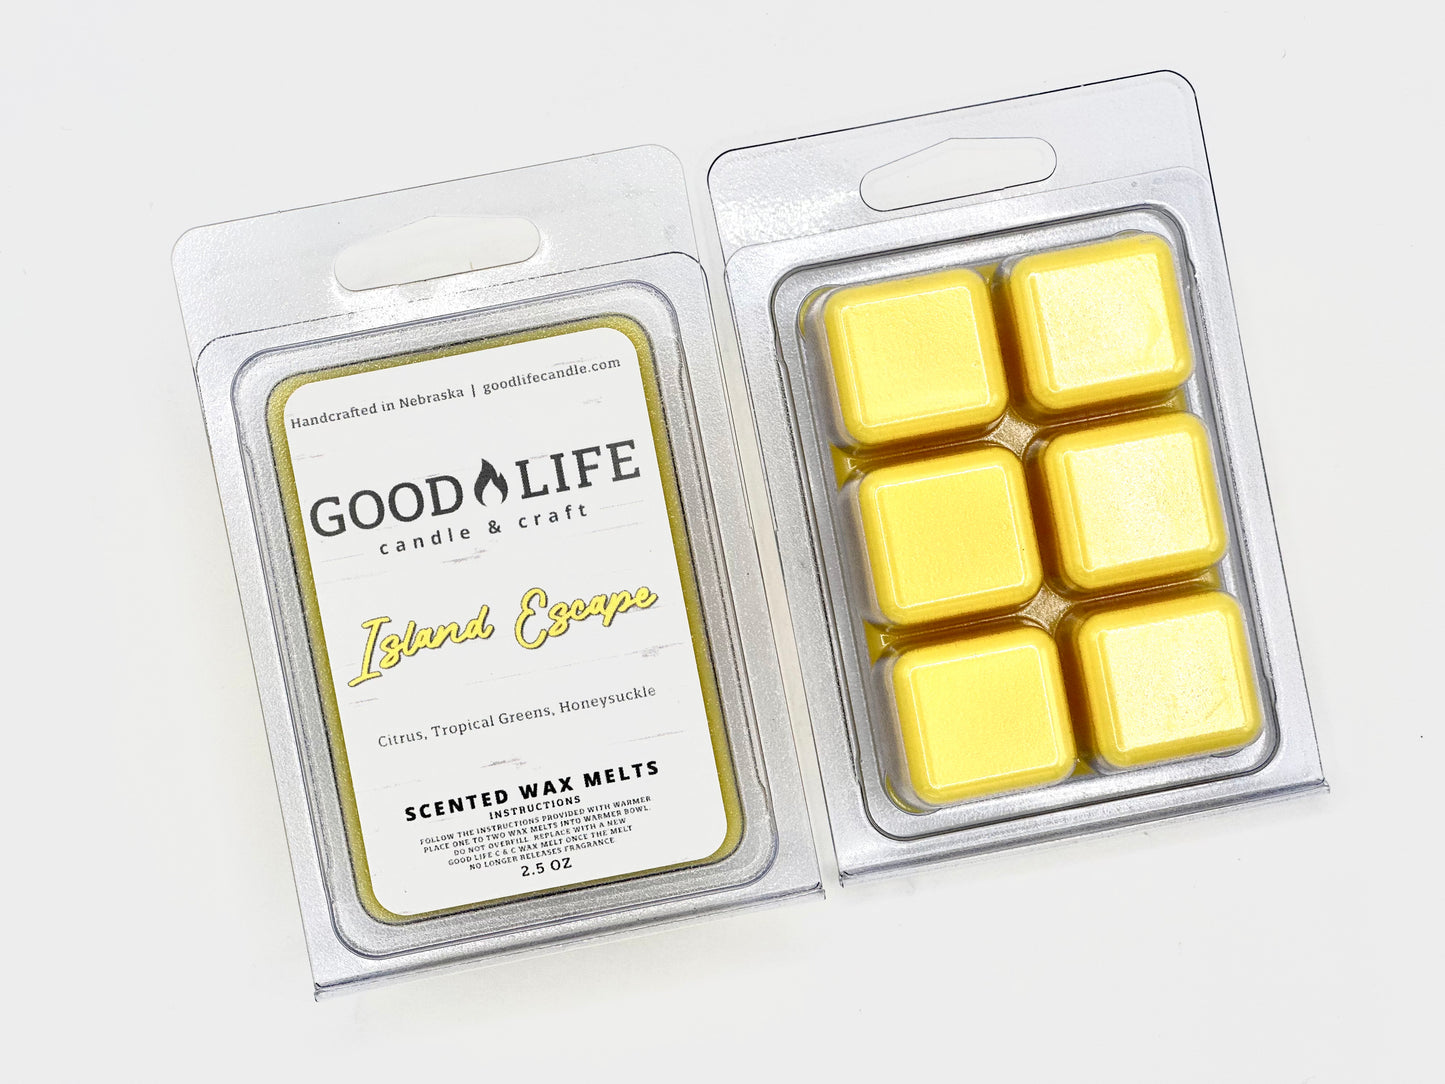 Island Escape Scented Wax Melts